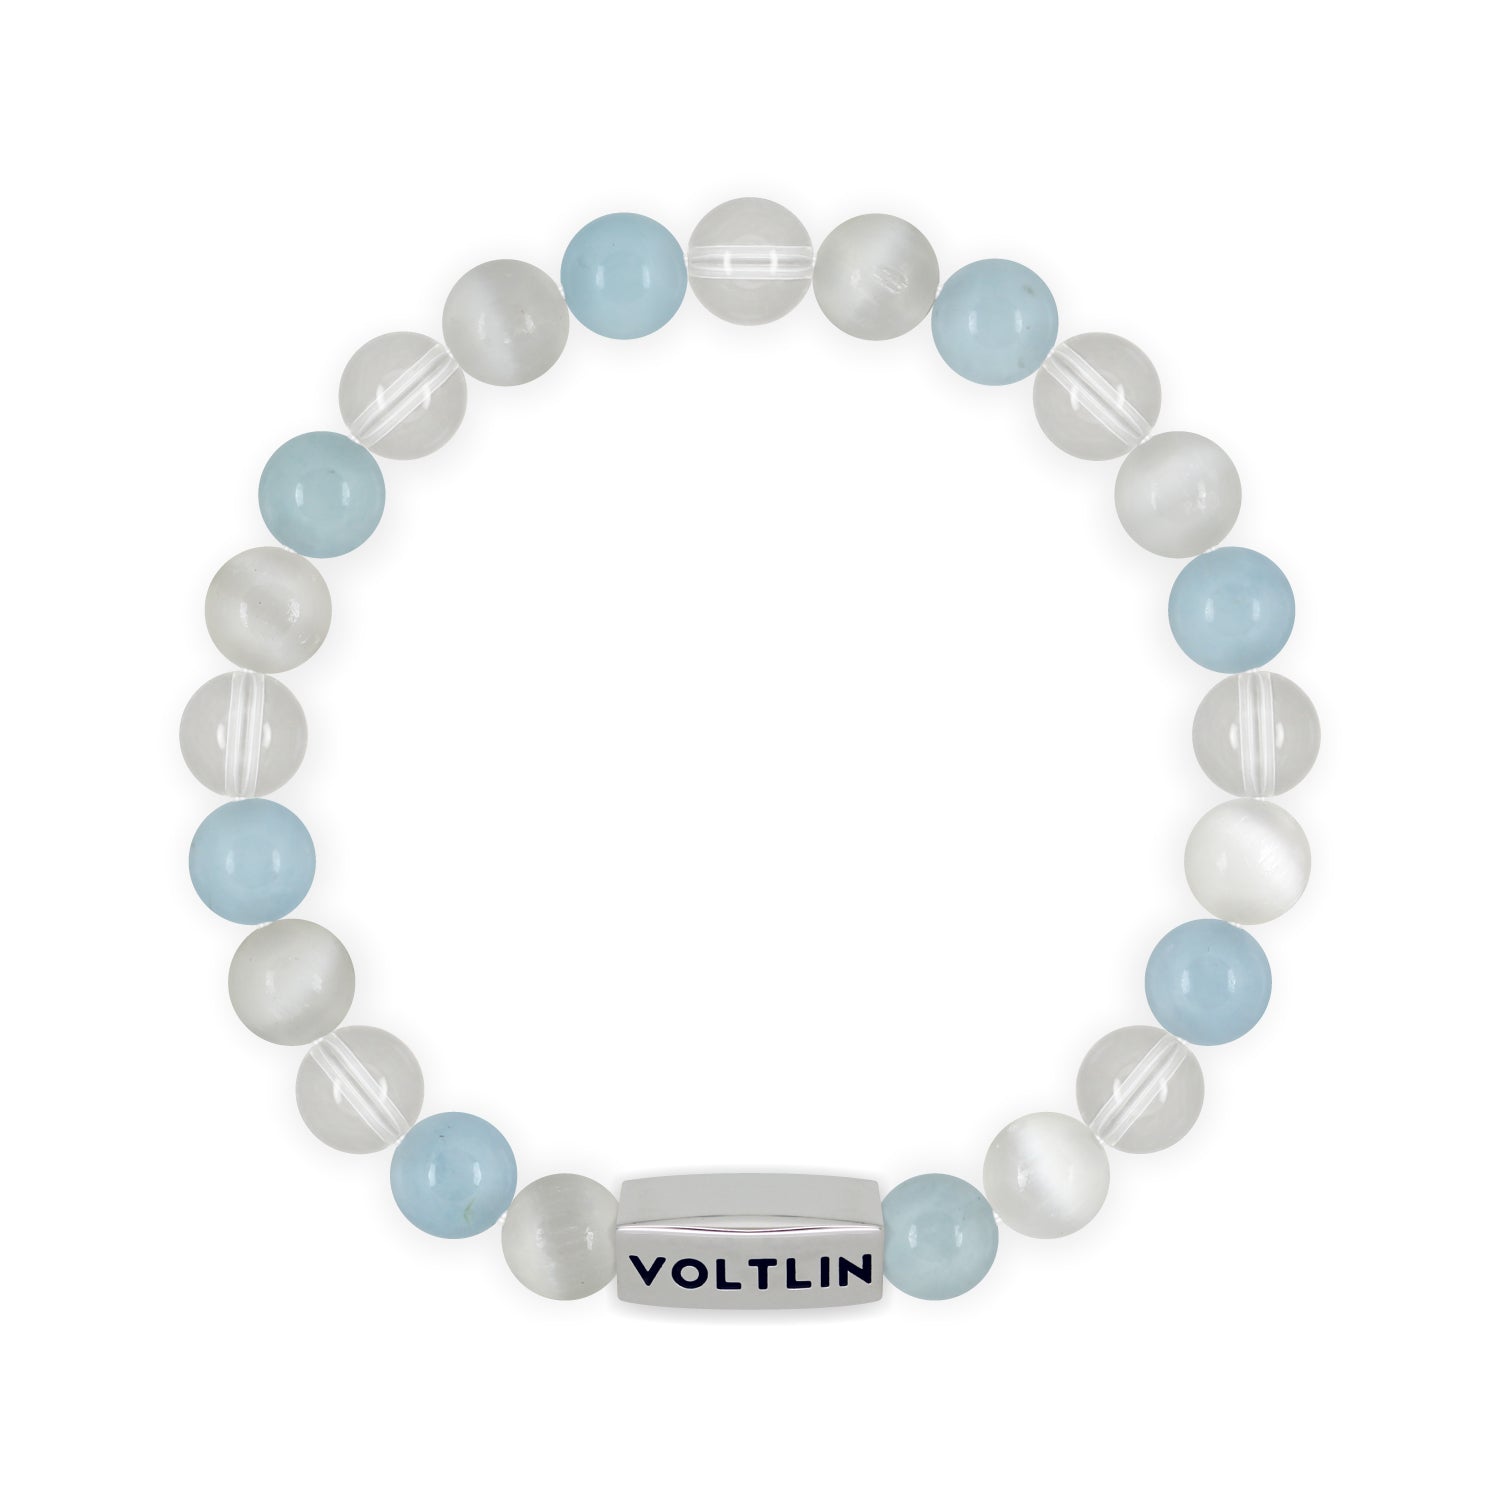 Front view of an 8mm Aquarius Zodiac beaded stretch bracelet featuring Selenite, Aquamarine, & Quartz crystal and silver stainless steel logo bead made by Voltlin